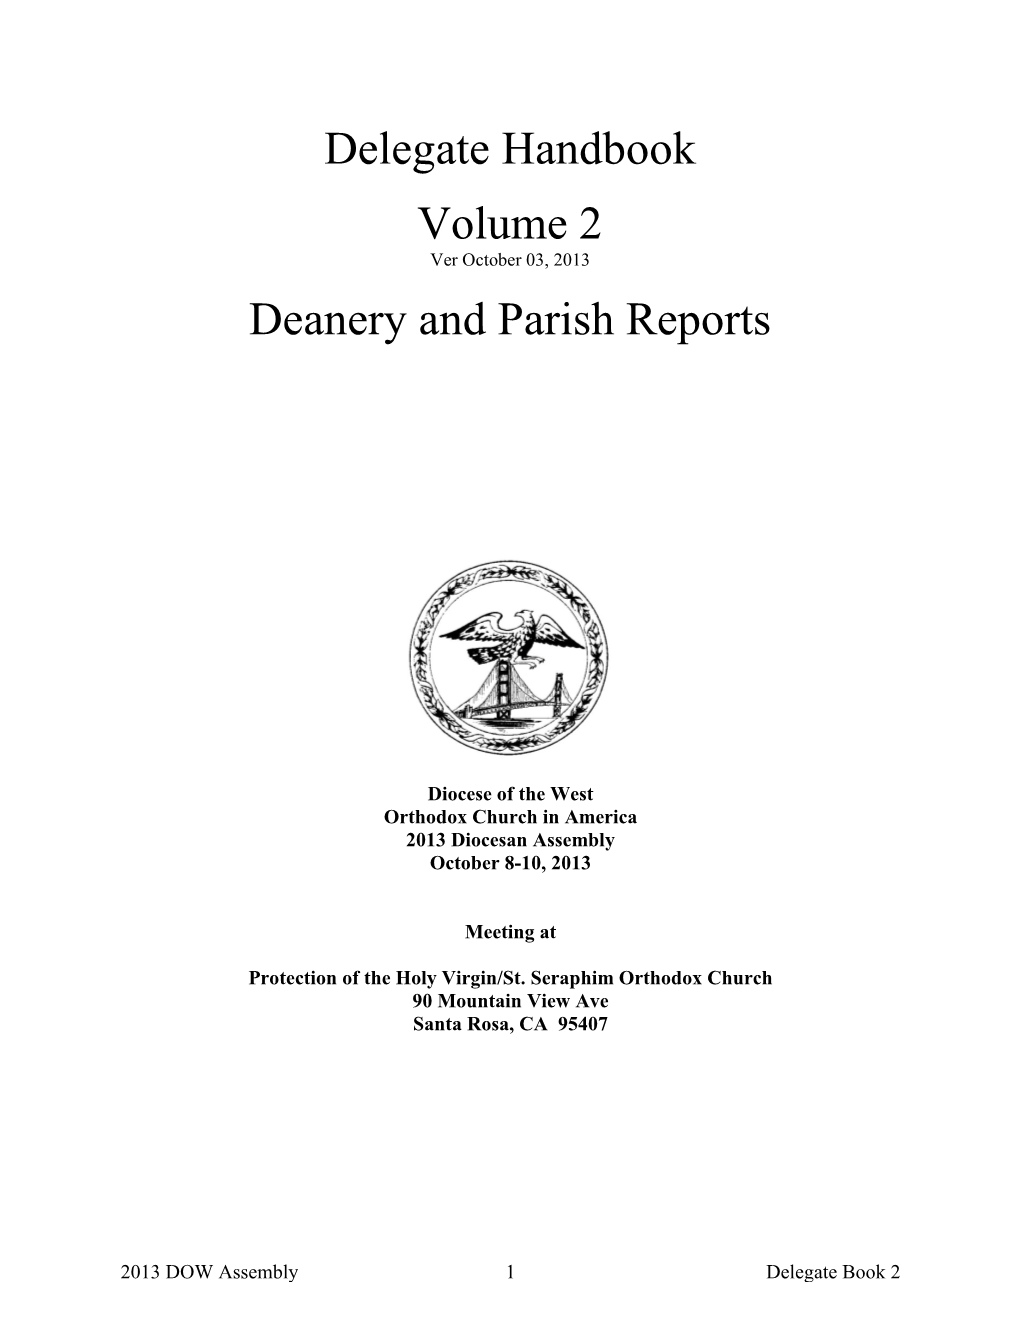 Book 2: Deanery and Parish Reports